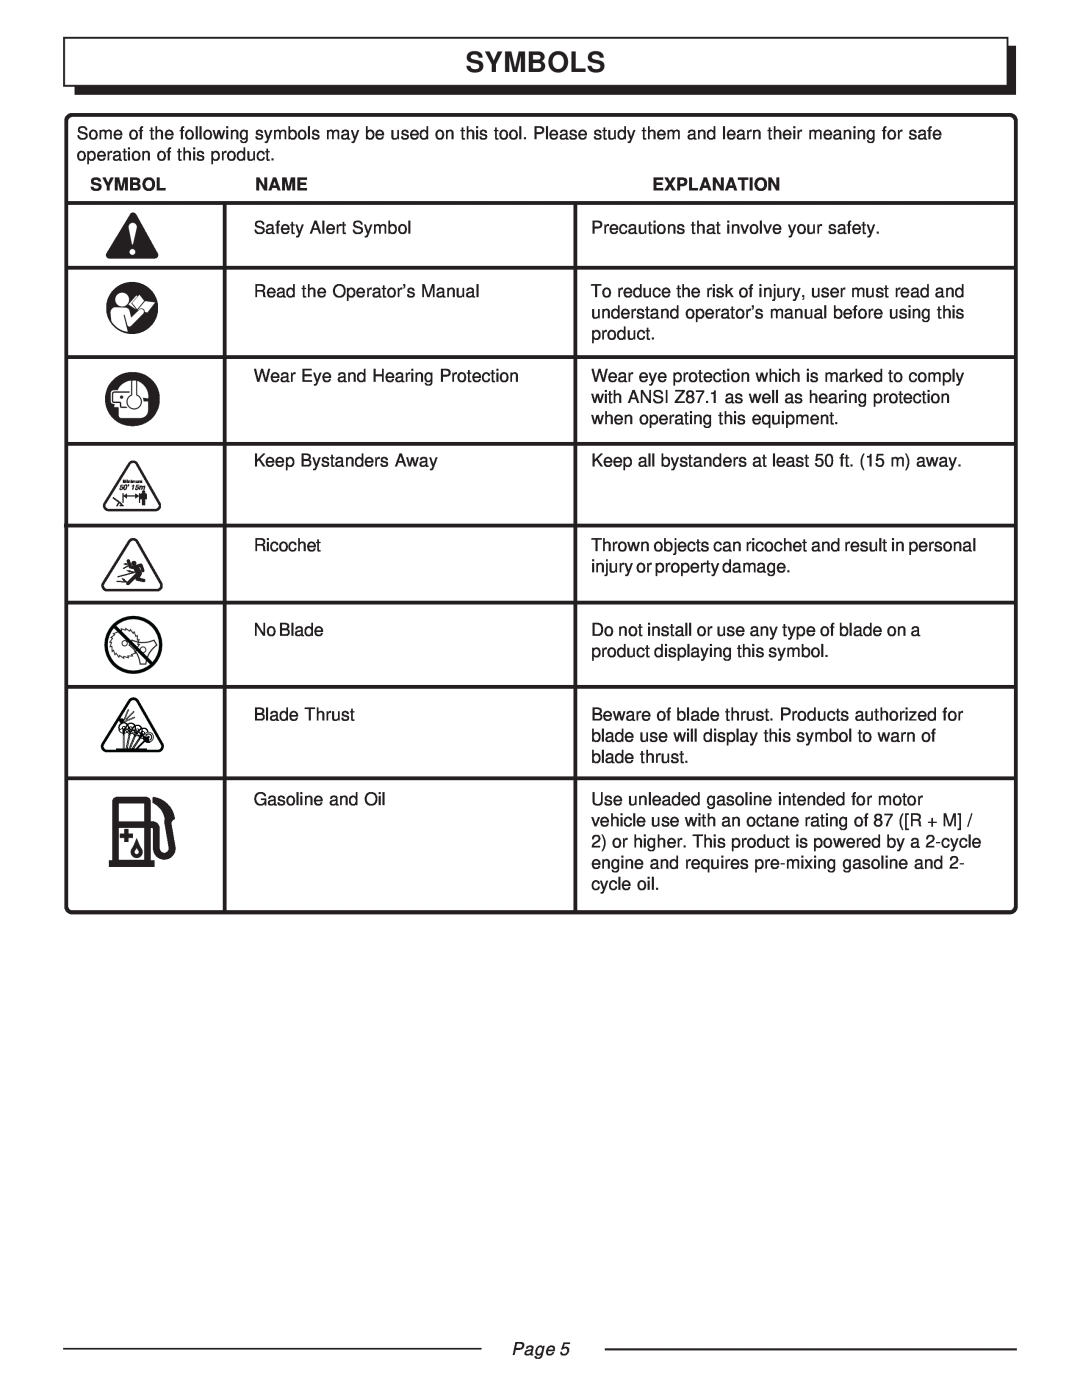 Homelite UT20003A, UT20043A, UT20042A, UT20022A, UT20002A, UT20023A manual Symbols, Name, Explanation, Page 